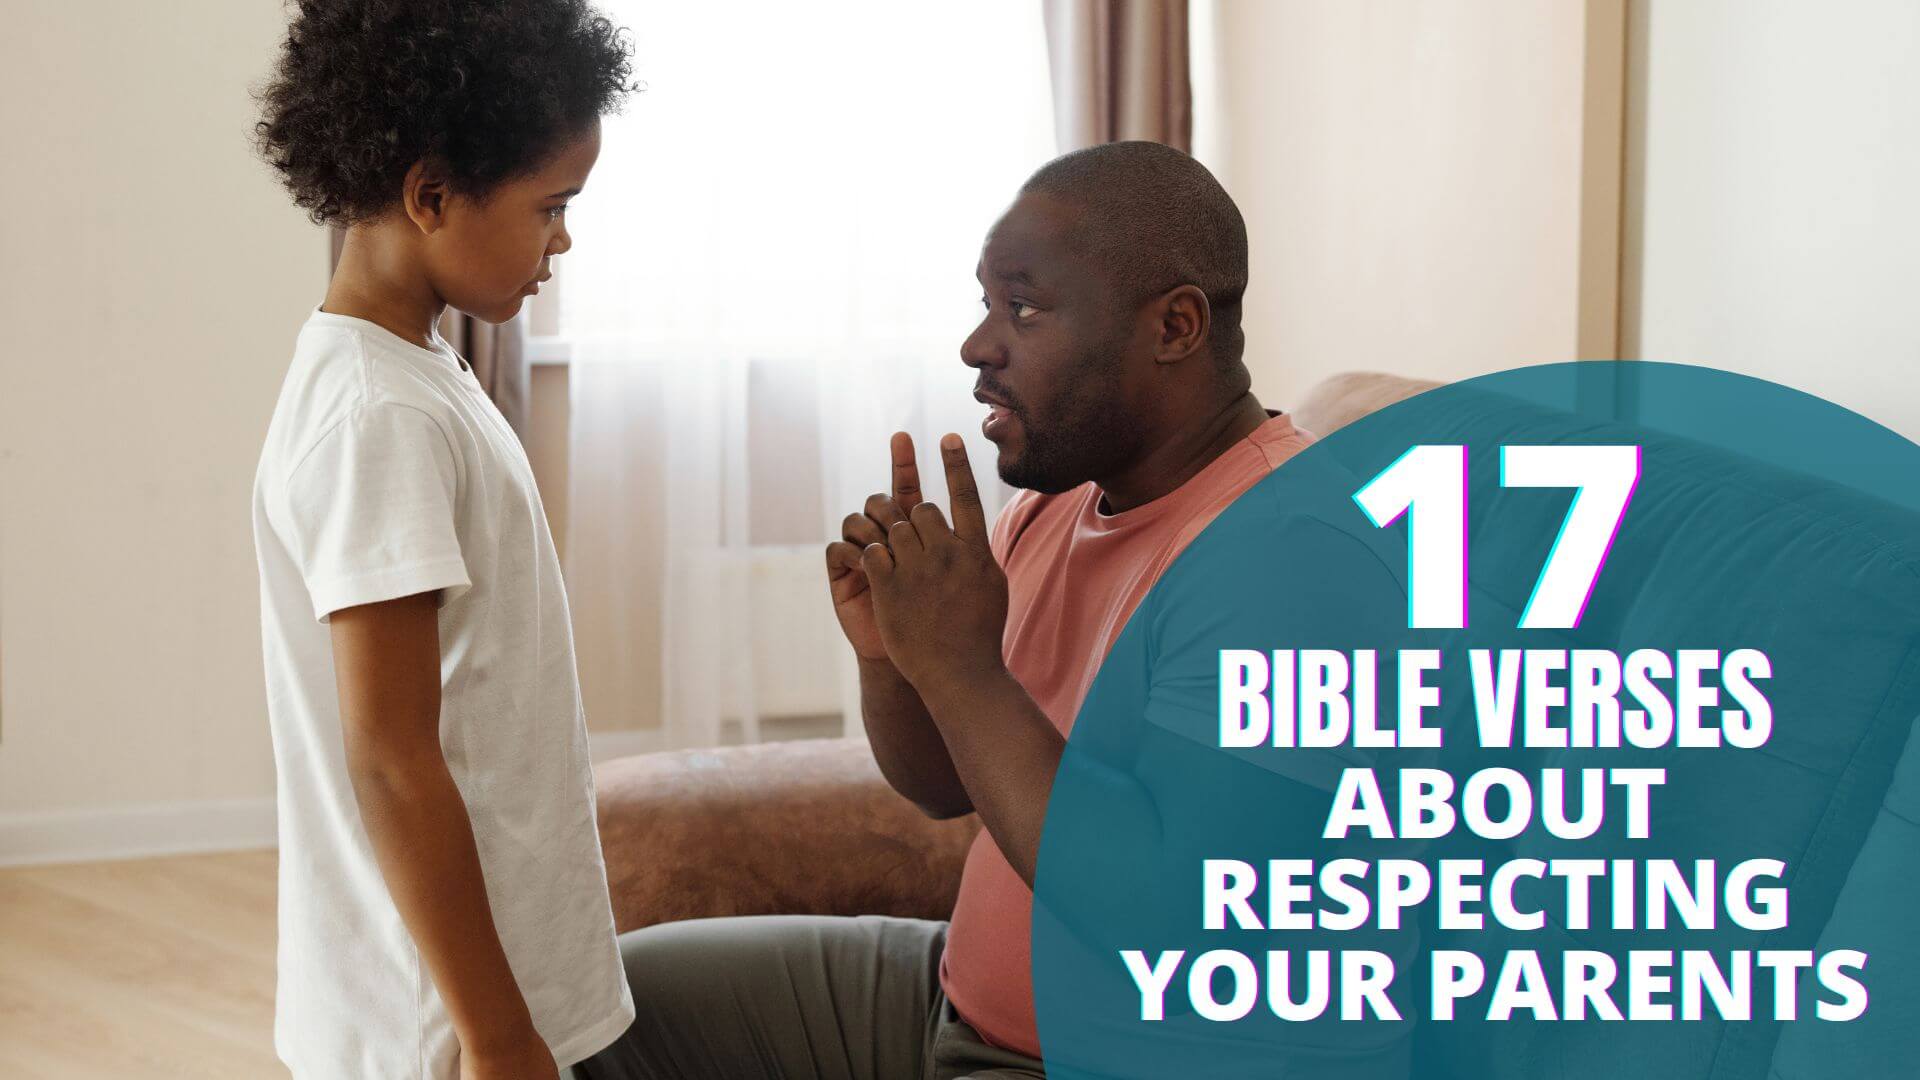 Bible verse about respecting your parents